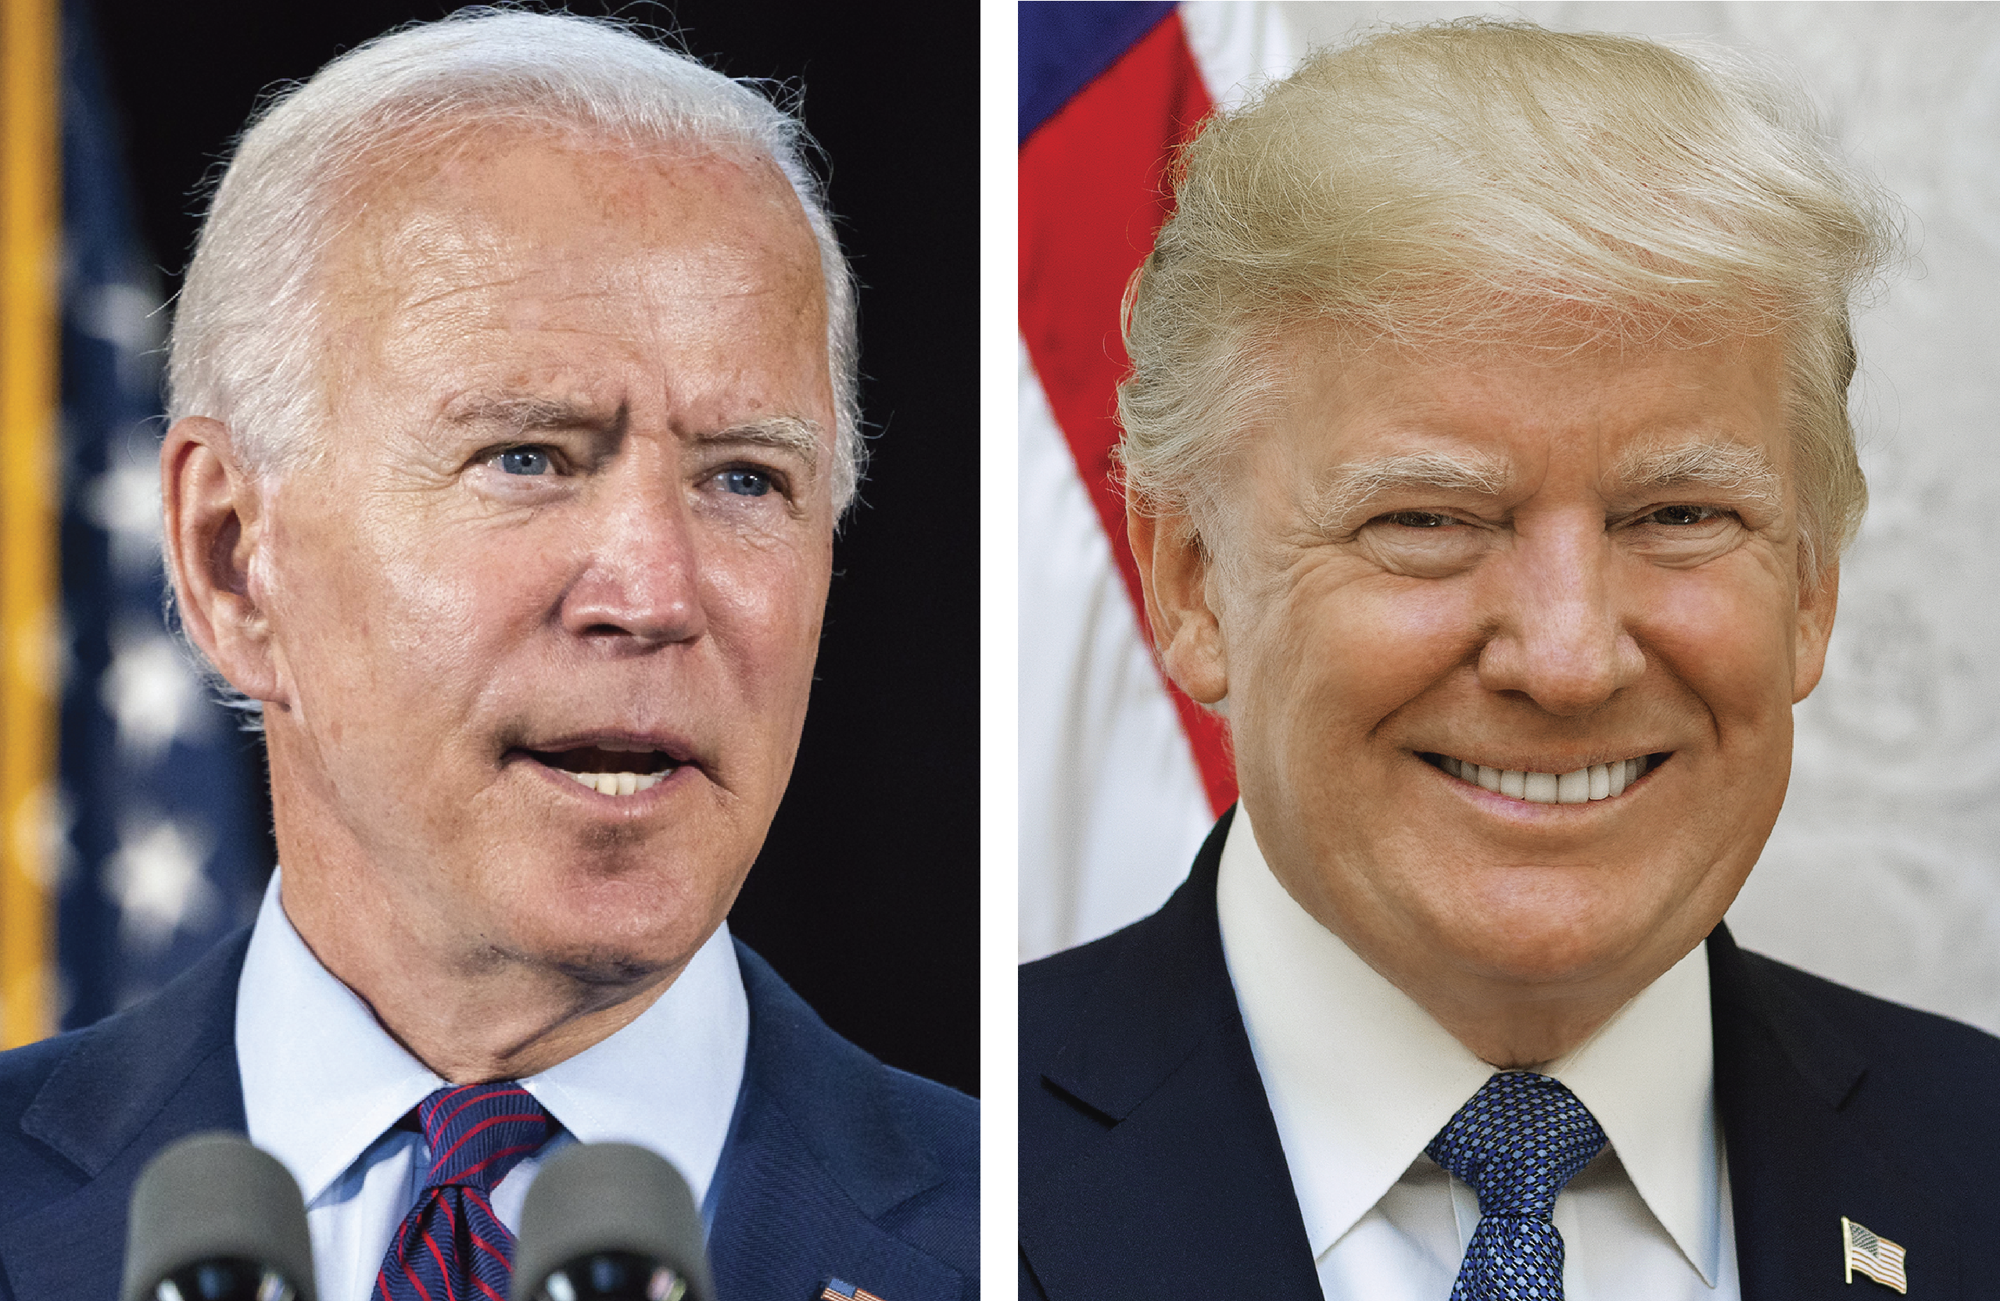 Former Vice President Joe Biden, a Democrat, and President Donald Trump. a Republican, offer a contrast in CEO skills and philosophies.